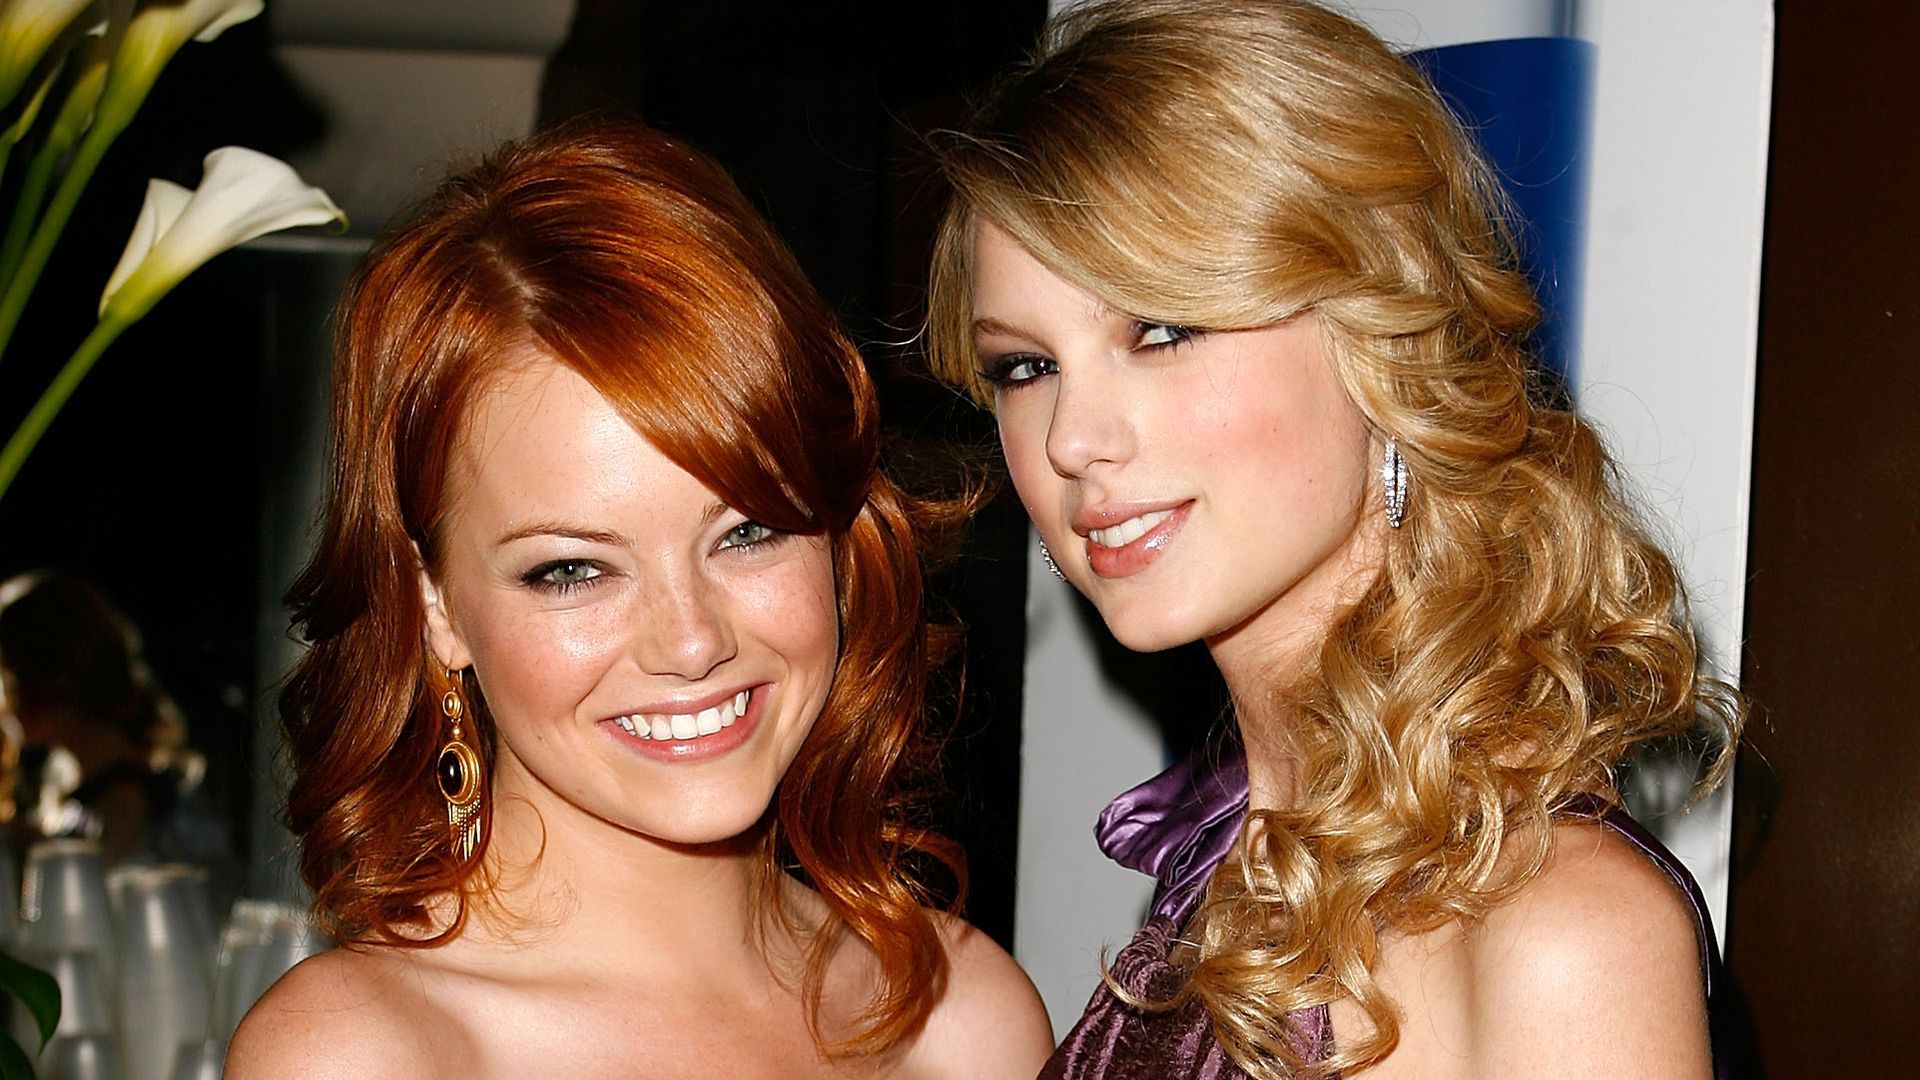 Emma Stone and Taylor Swift during cocktails at Hollywood Life Magazine's 10th Annual Young Hollywood Awards